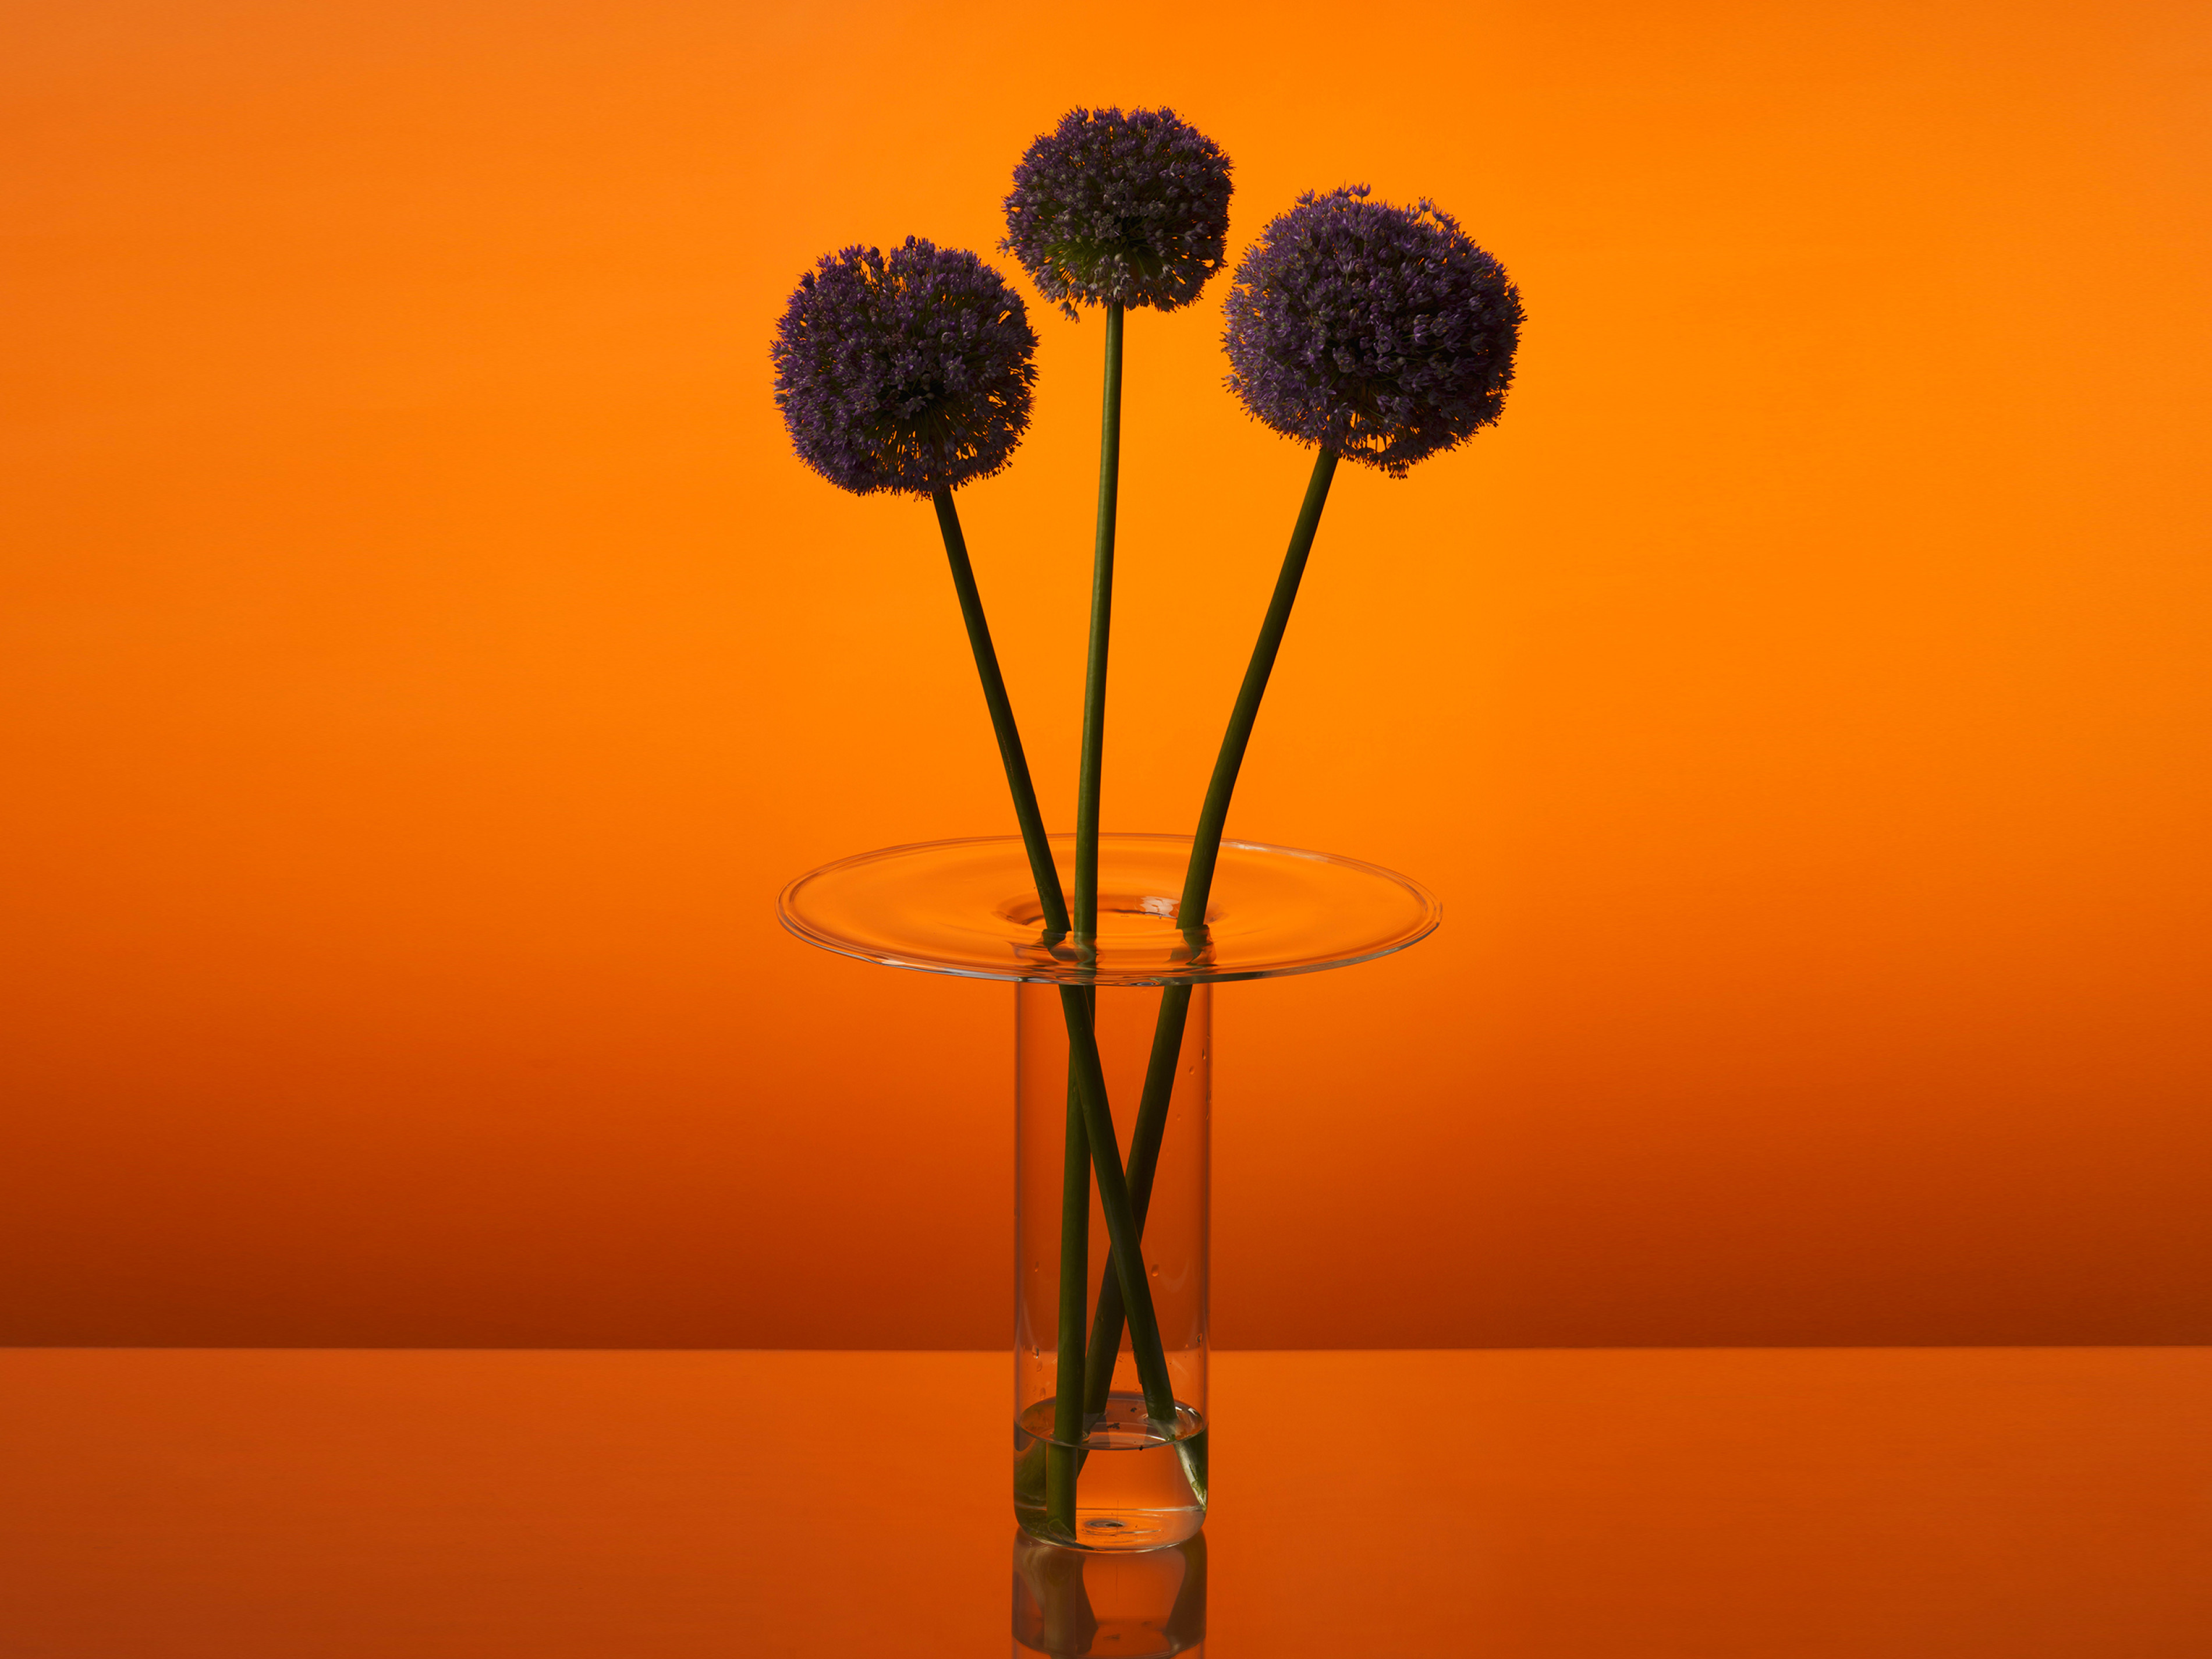 Glass vase with purple flowers inside on an orange background